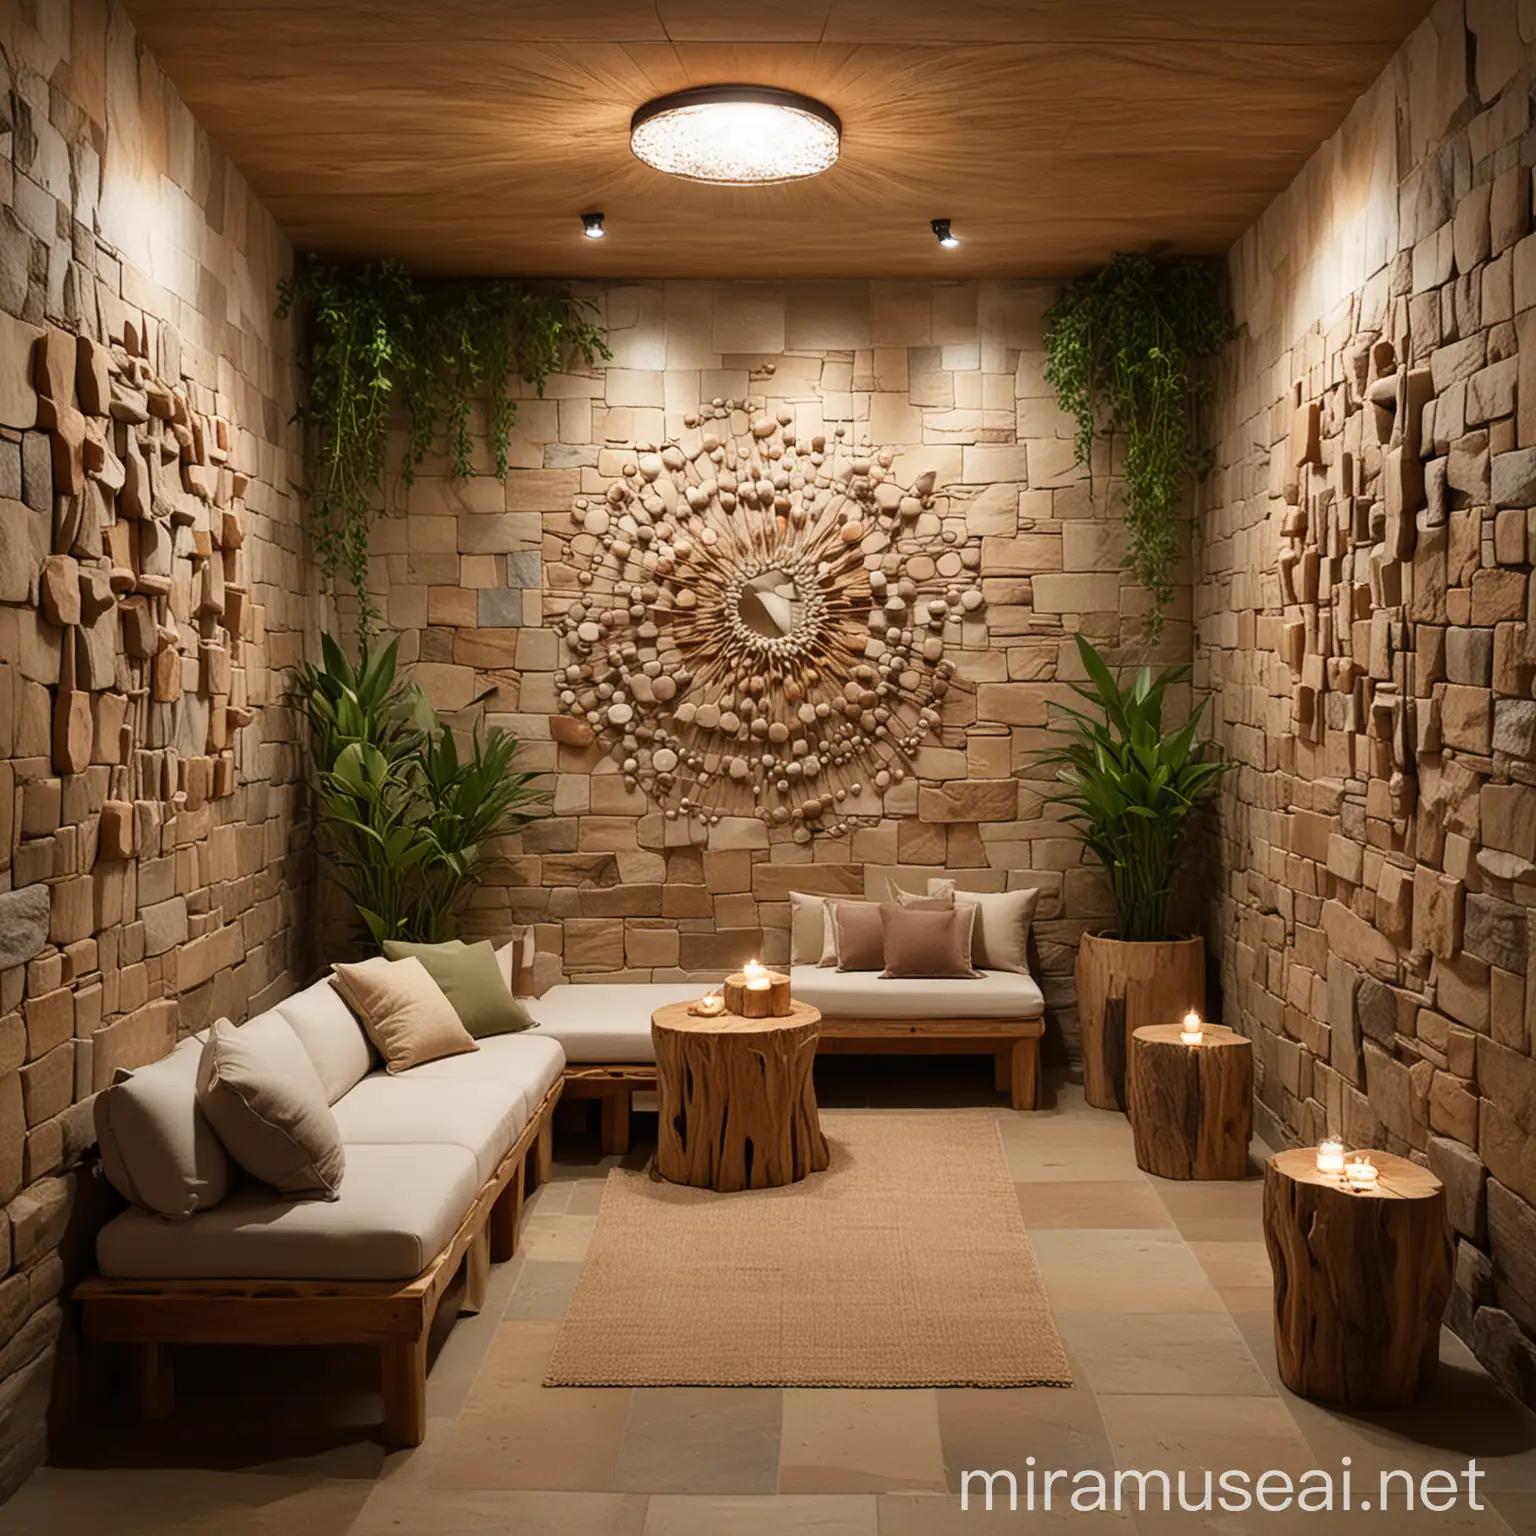 Tranquil Healing Area with Handmade Interior Design Elements